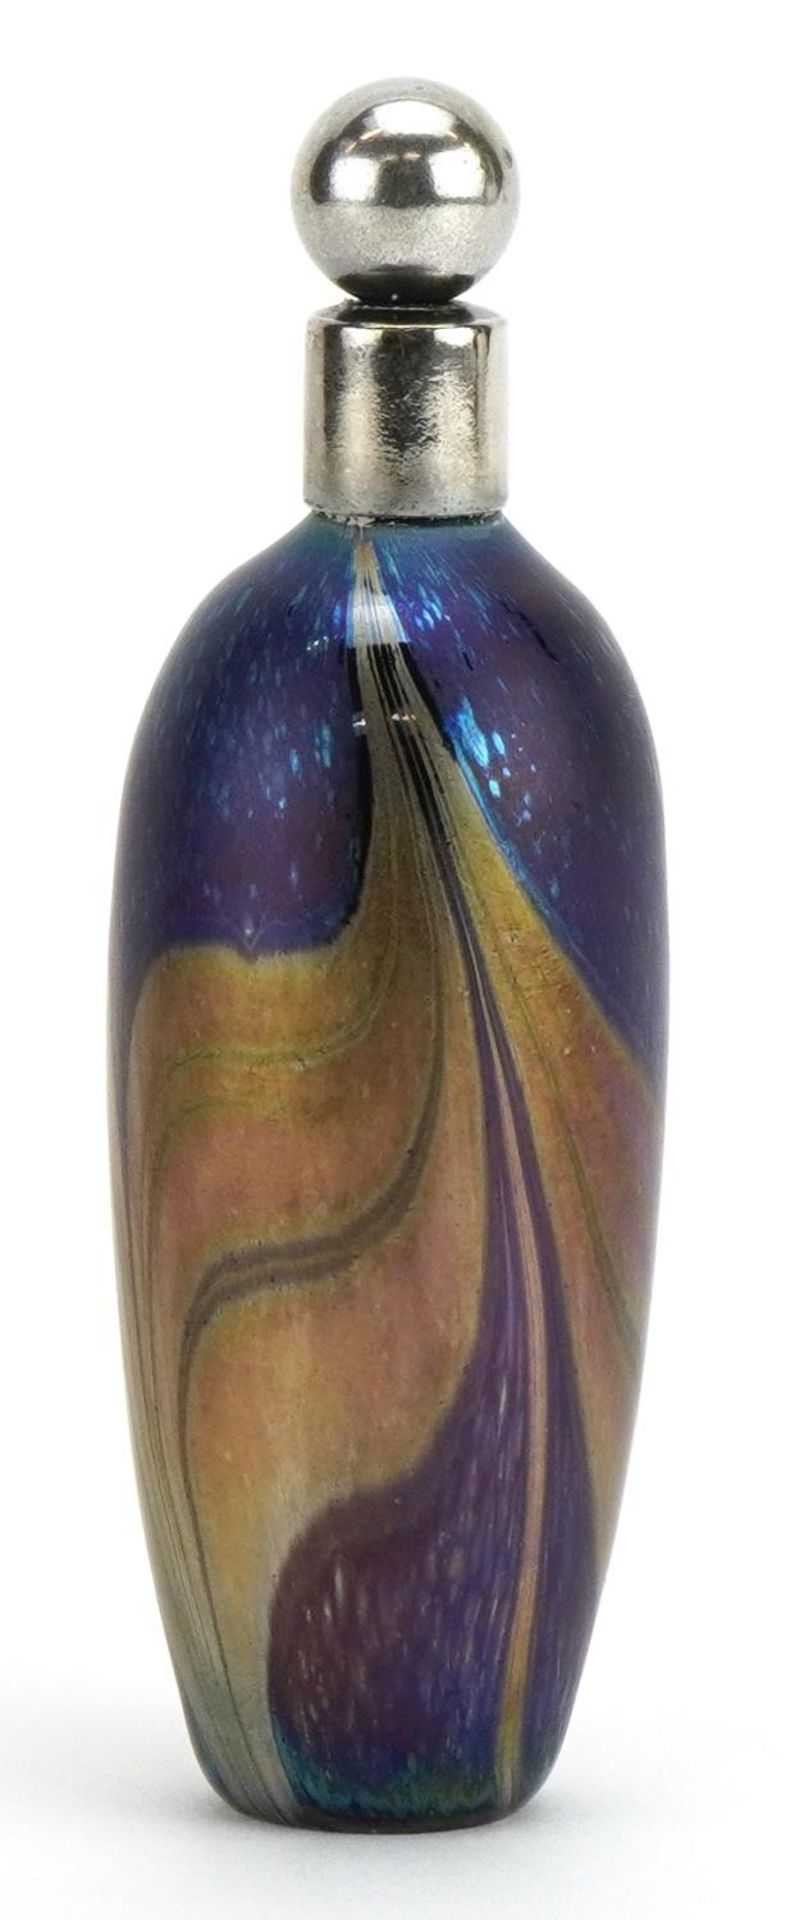 John Ditchfield, Glasform iridescent art glass scent bottle with combed decoration and white metal - Image 2 of 5